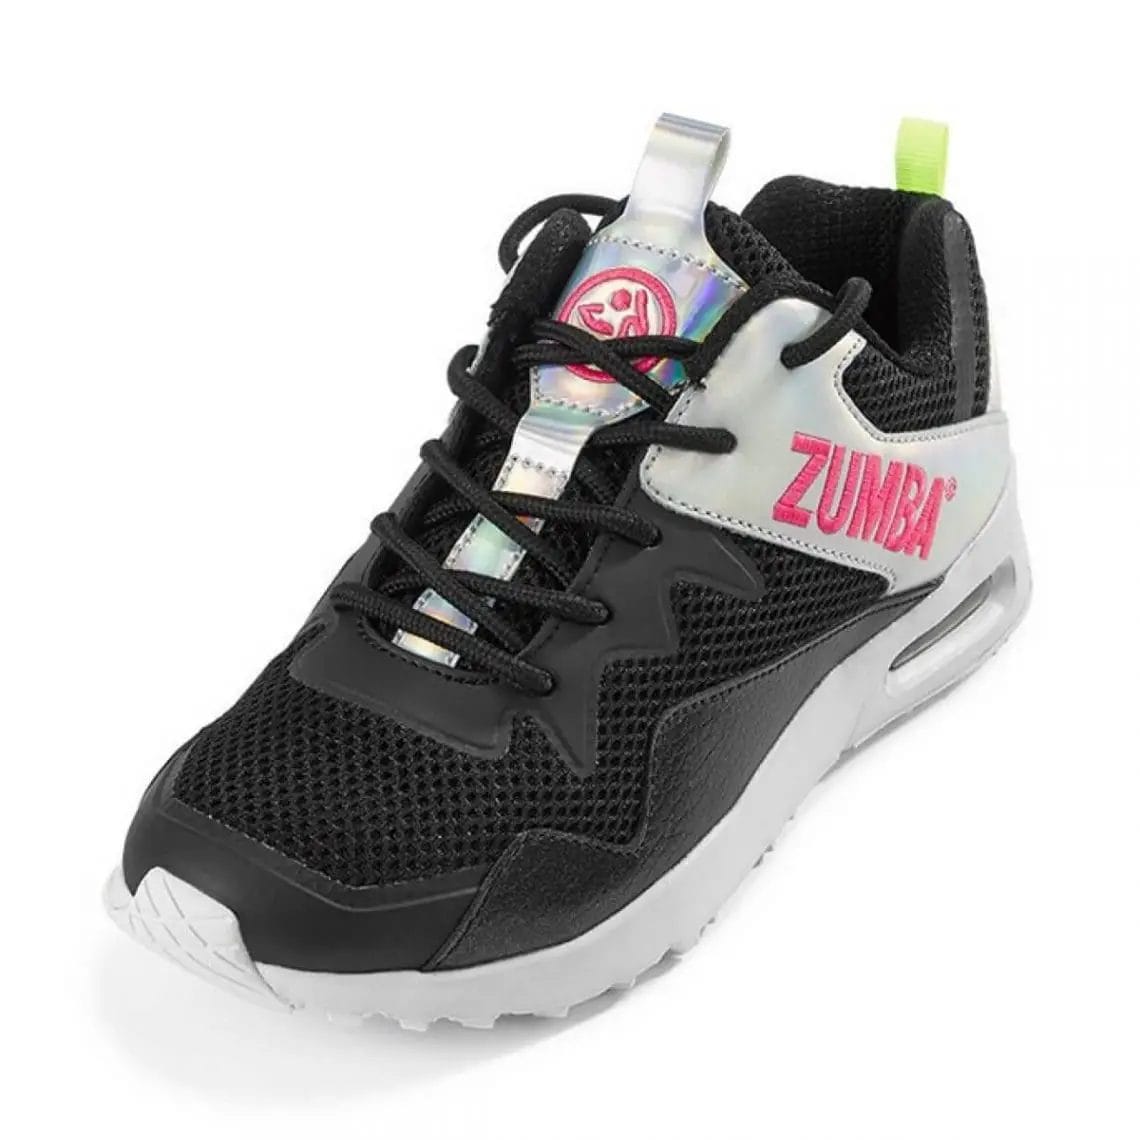 Zumba Shoes Best Picks for Your Aerobic Dance Workout